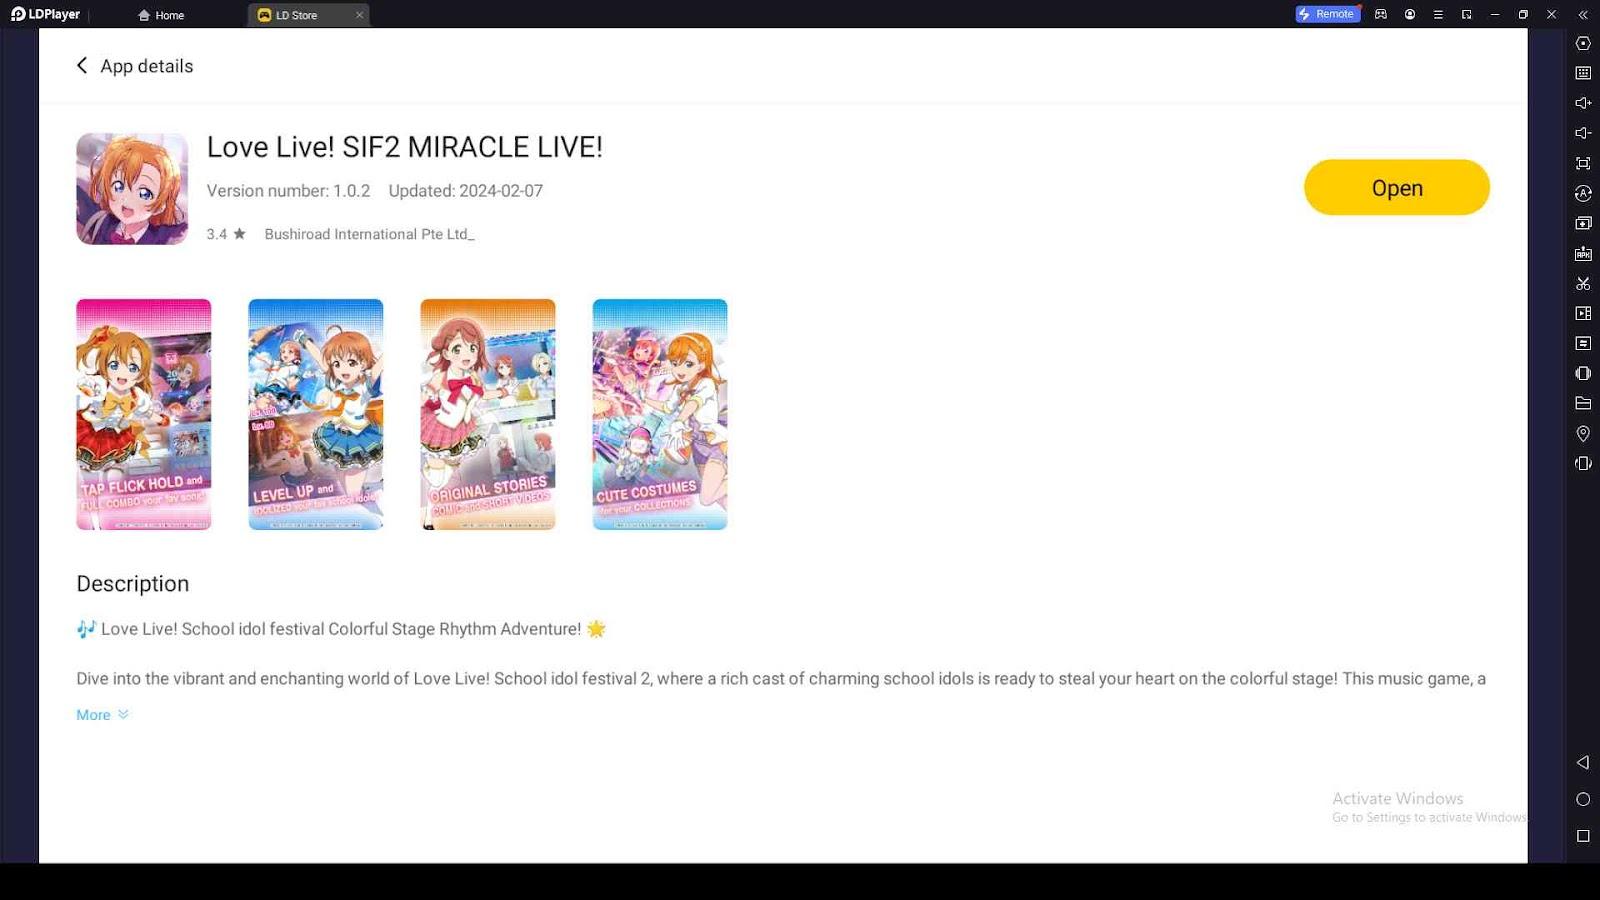 Enjoy Love Live! SIF2 on PC with LDPlayer